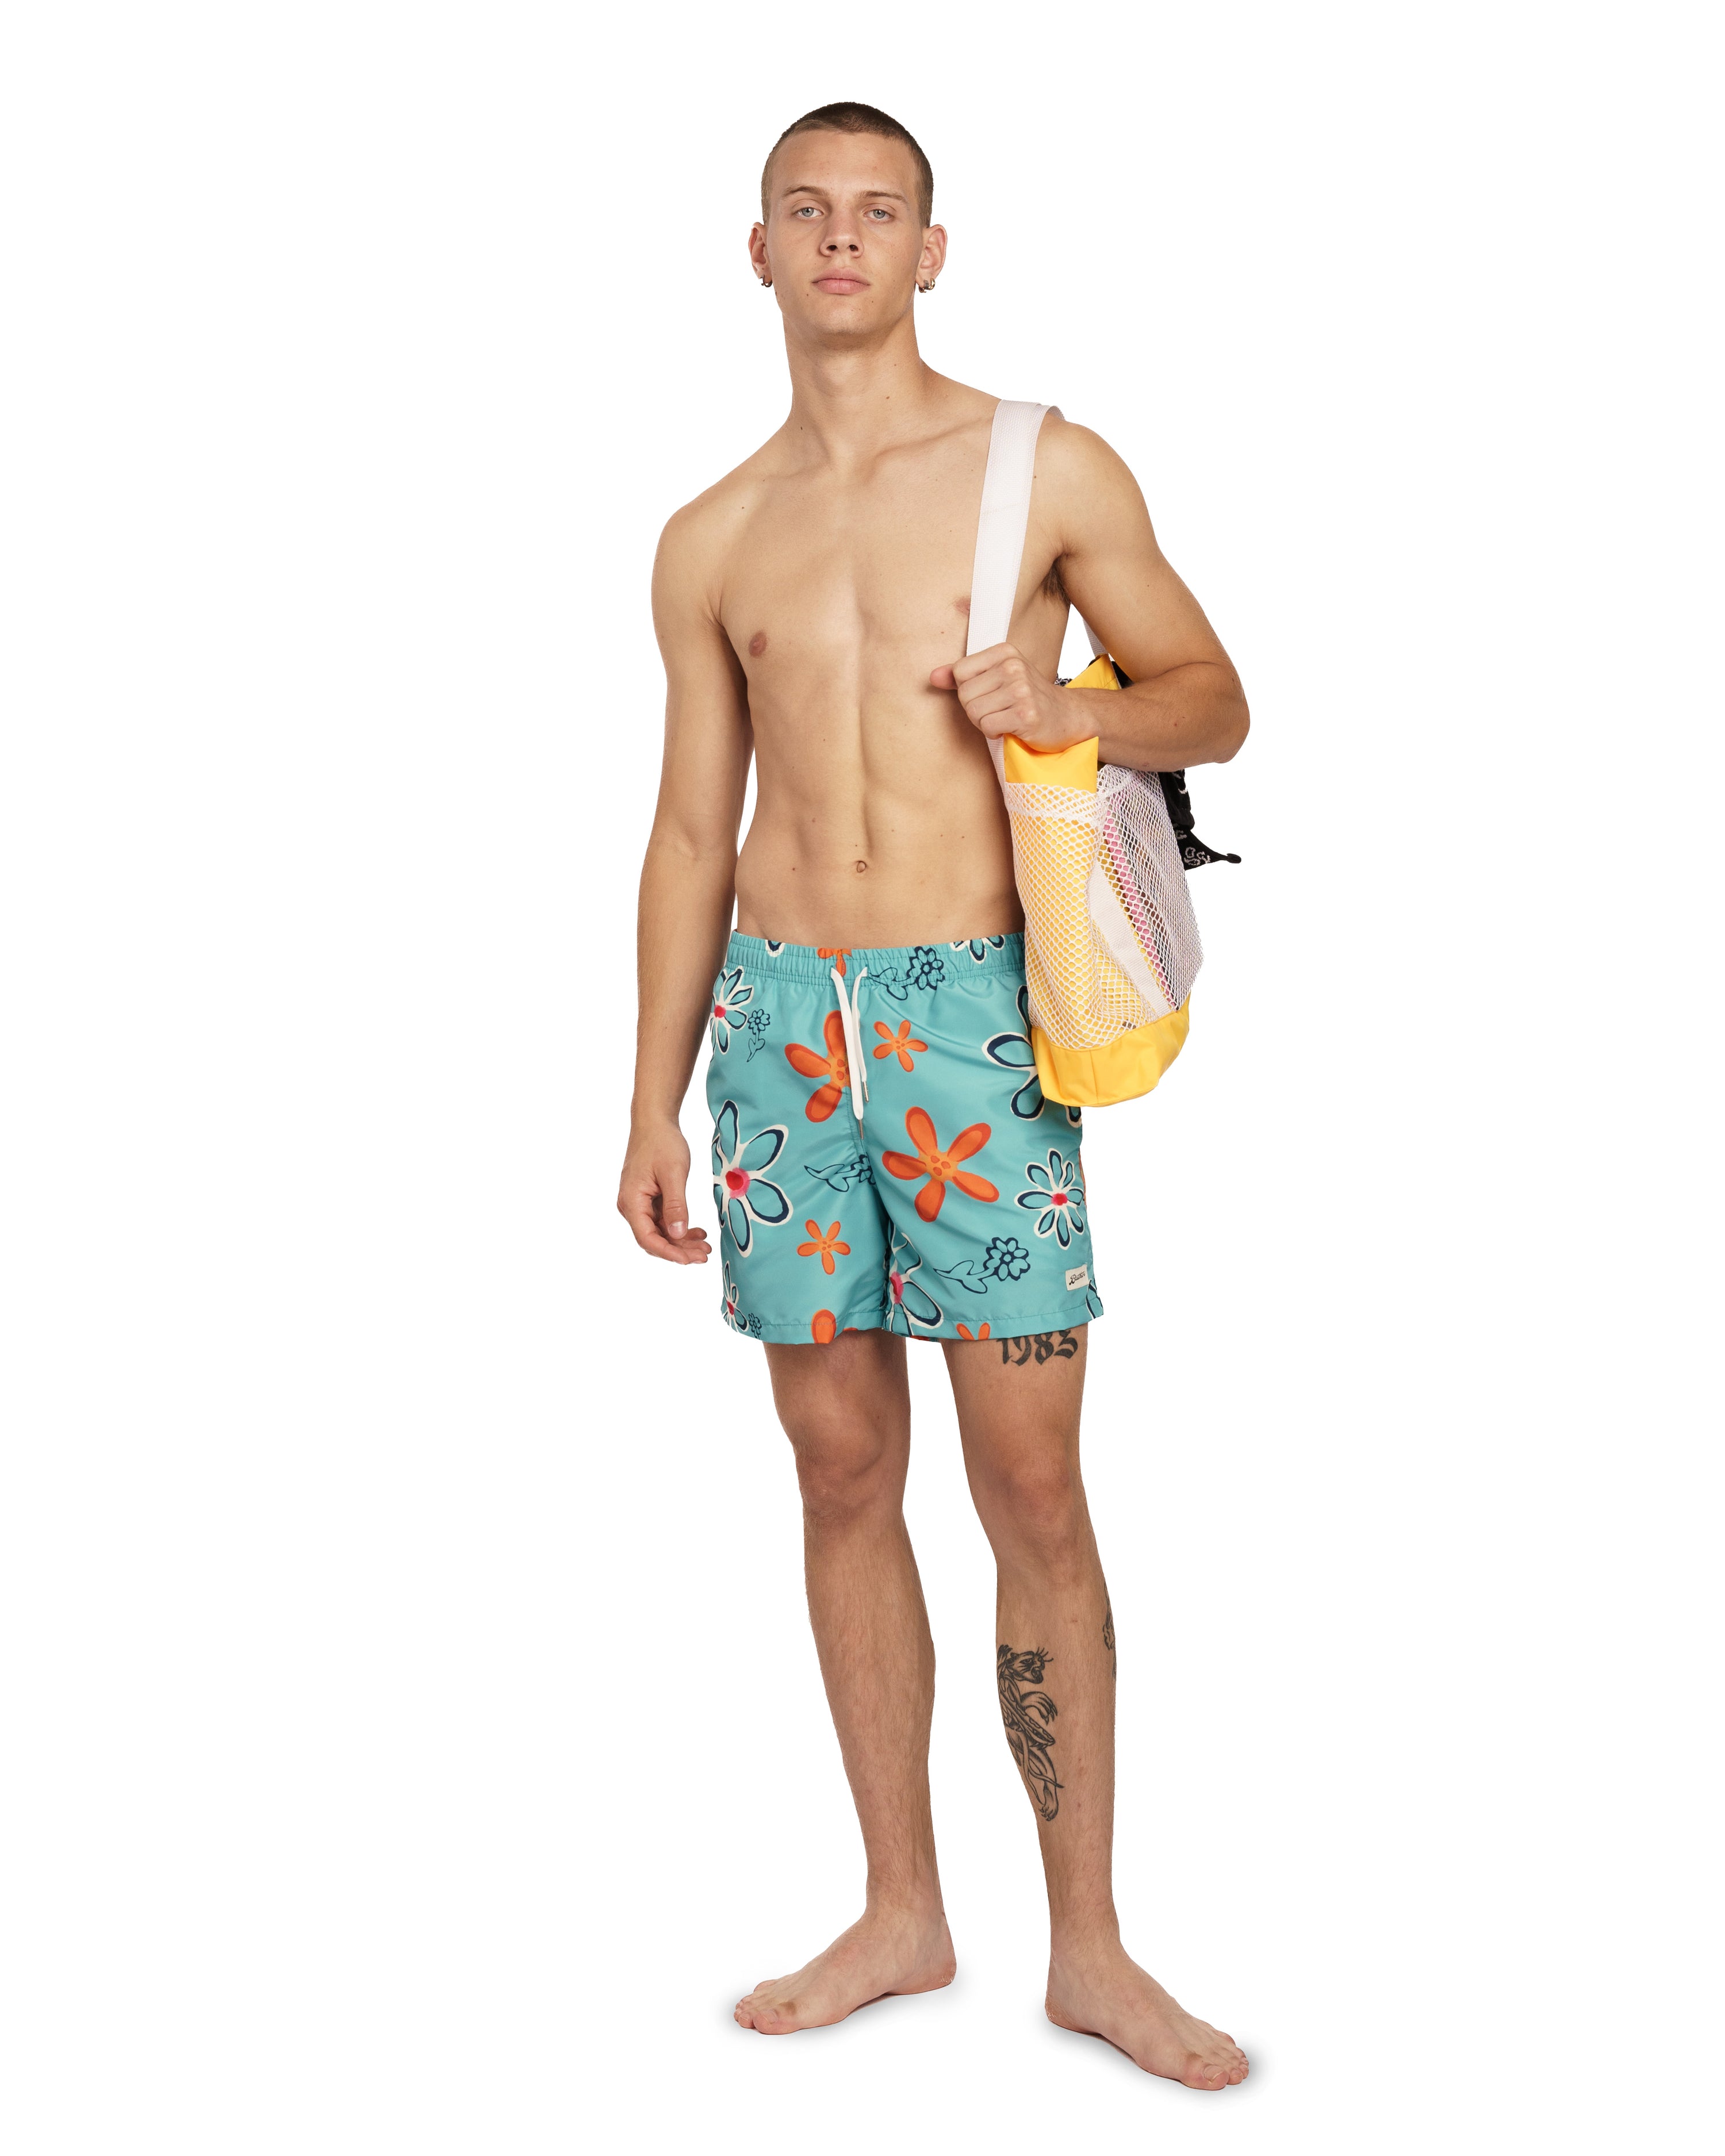 Model wearing Blue Bather swim trunk with floral pattern and orange flowers